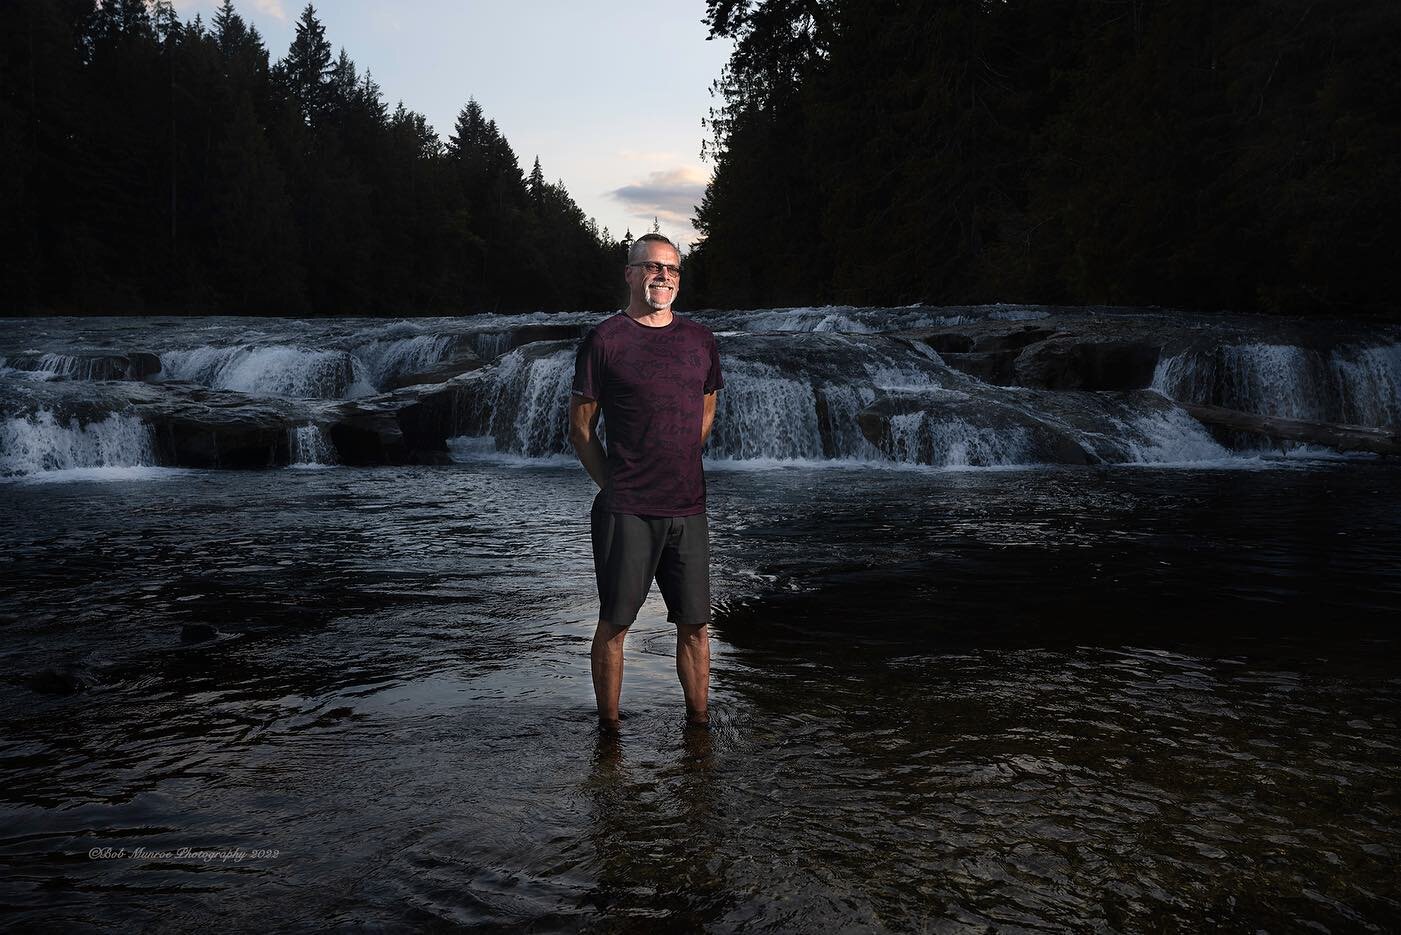 While I was on Vancouver Island in British Columbia I took my sister Linda and her spouse Darcy to Nymph Falls for an evening photoshoot. I used a NikonZ7 with 24-70 lens and a Godox 200w strobe. For you camera nerds, f/5.6, ISO 160 and speed 1/125 #